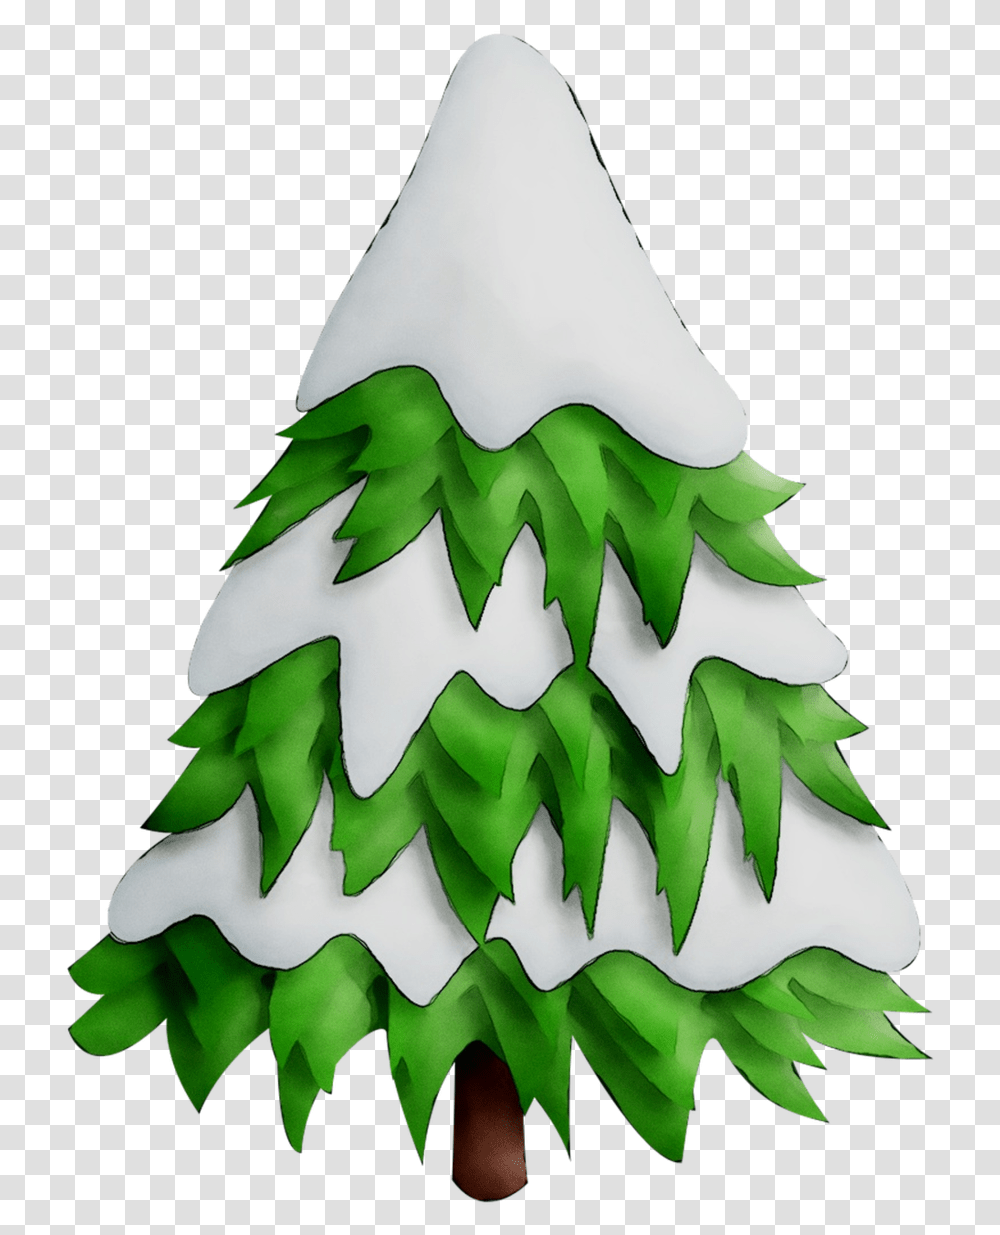 Green Image Clipart Christmas Tree Boreal Conifer, Plant, Ornament, Fir, Abies Transparent Png